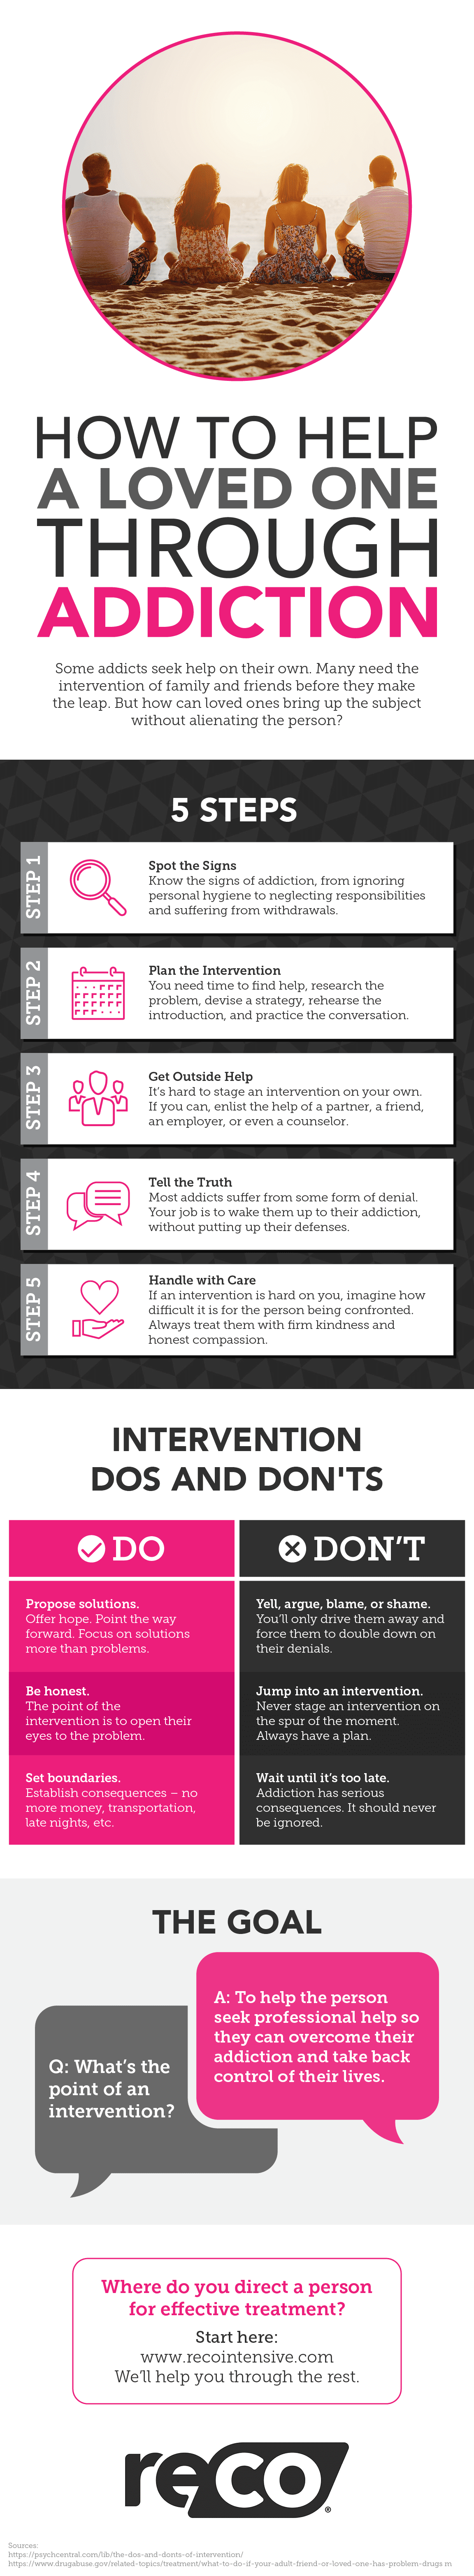 How to Help a Loved One Through Addiction Infographic